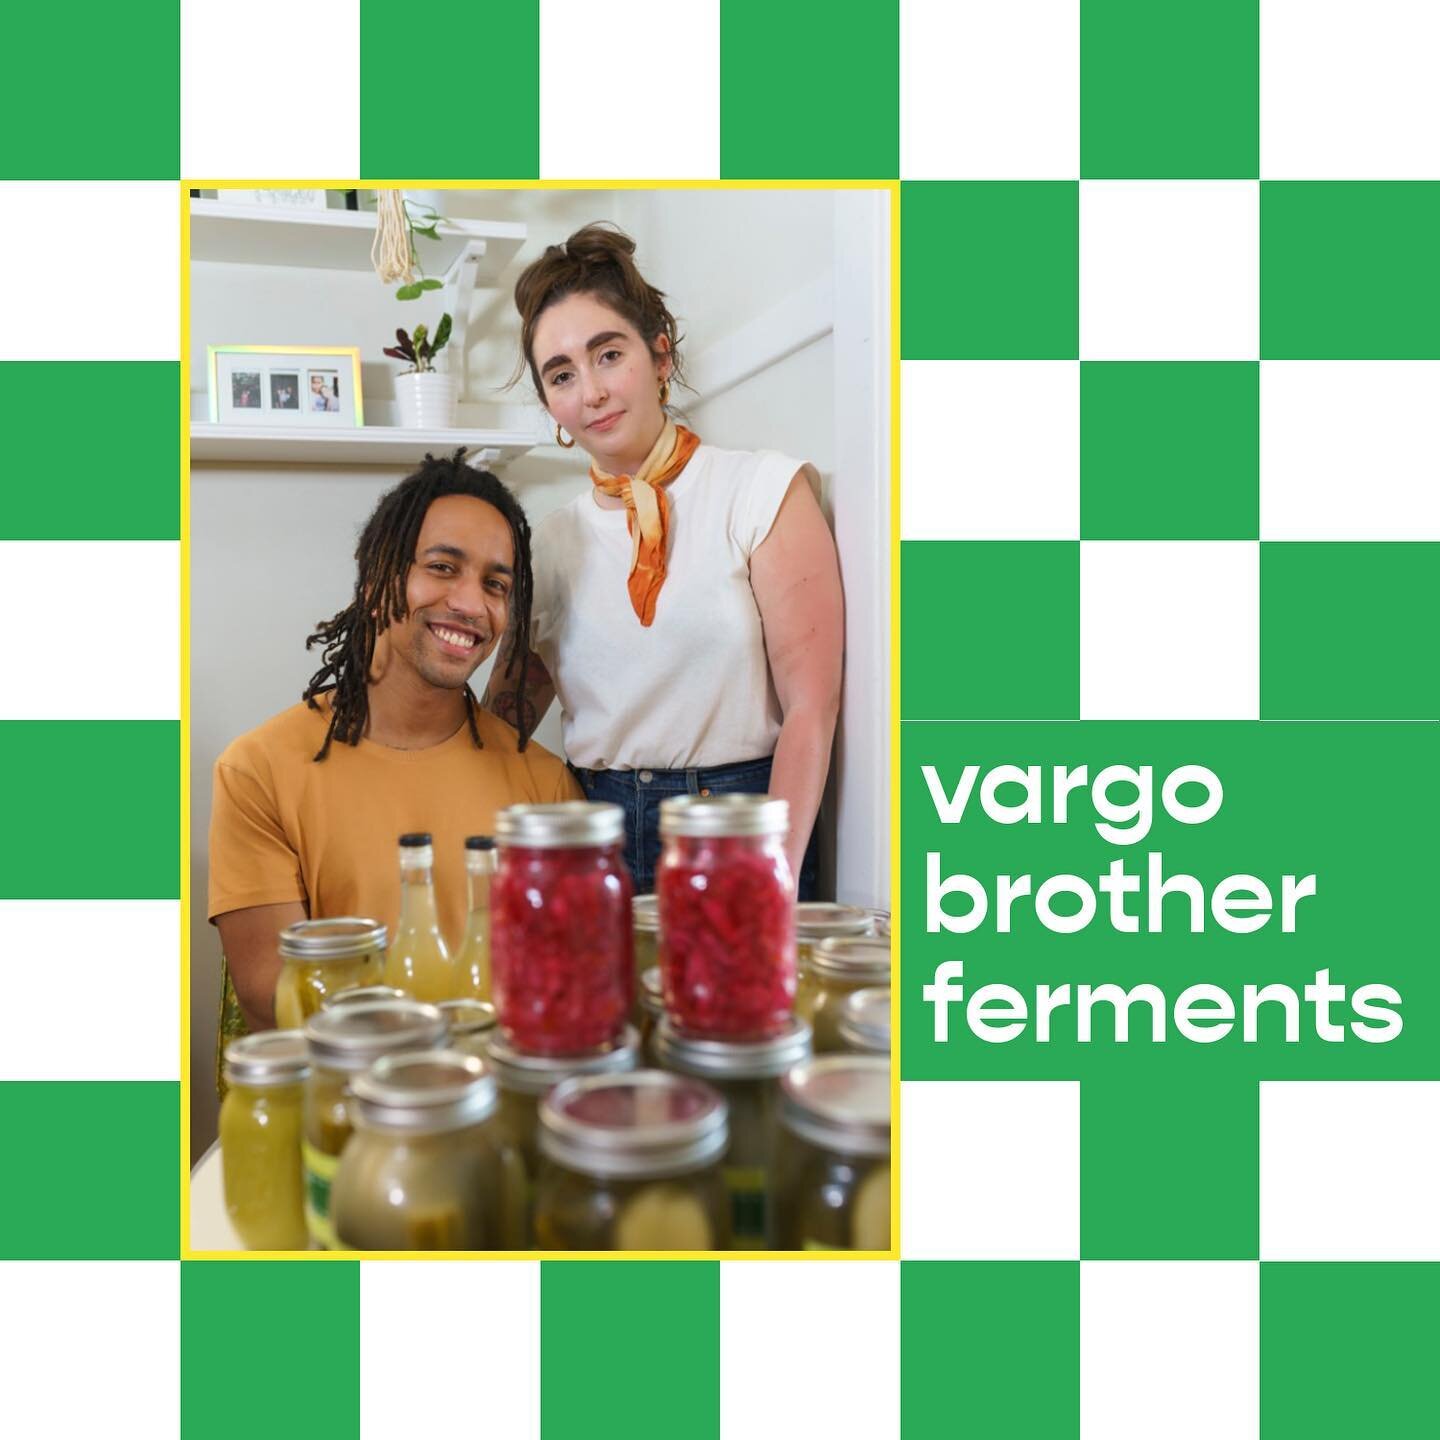 Longtime cooks Sebastian Vargo and Taylor Hanna are the duo behind @vargobrotherferments &ndash; a pandemic project turned full-time pickle operation born out of love for old school fermentation and preservation.
When Sebastian began selling kraut an